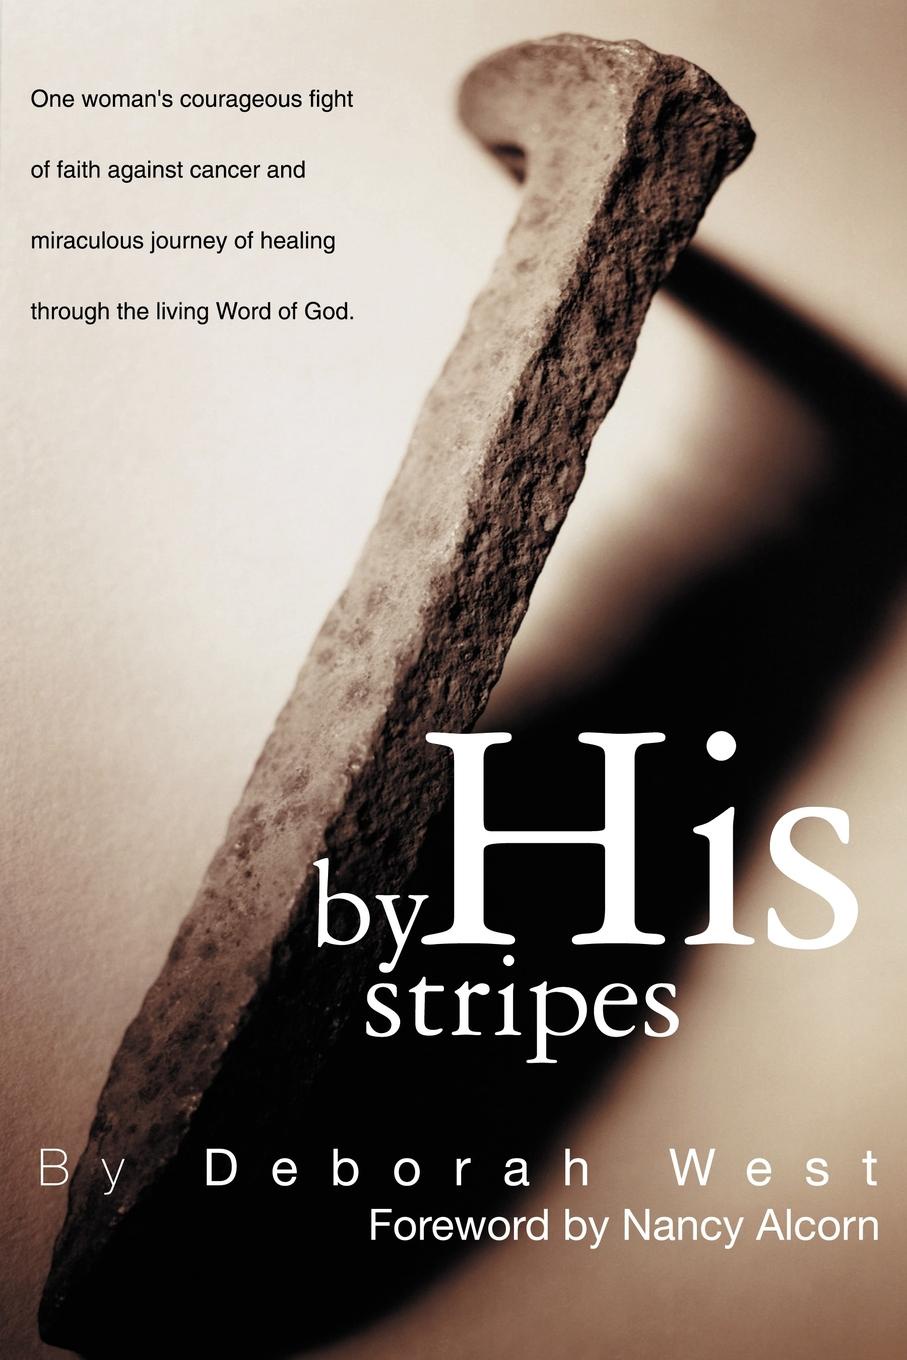 By His Stripes. The story of one woman`s courageous fight of faith against cancer and miraculous healing through the living Word of God